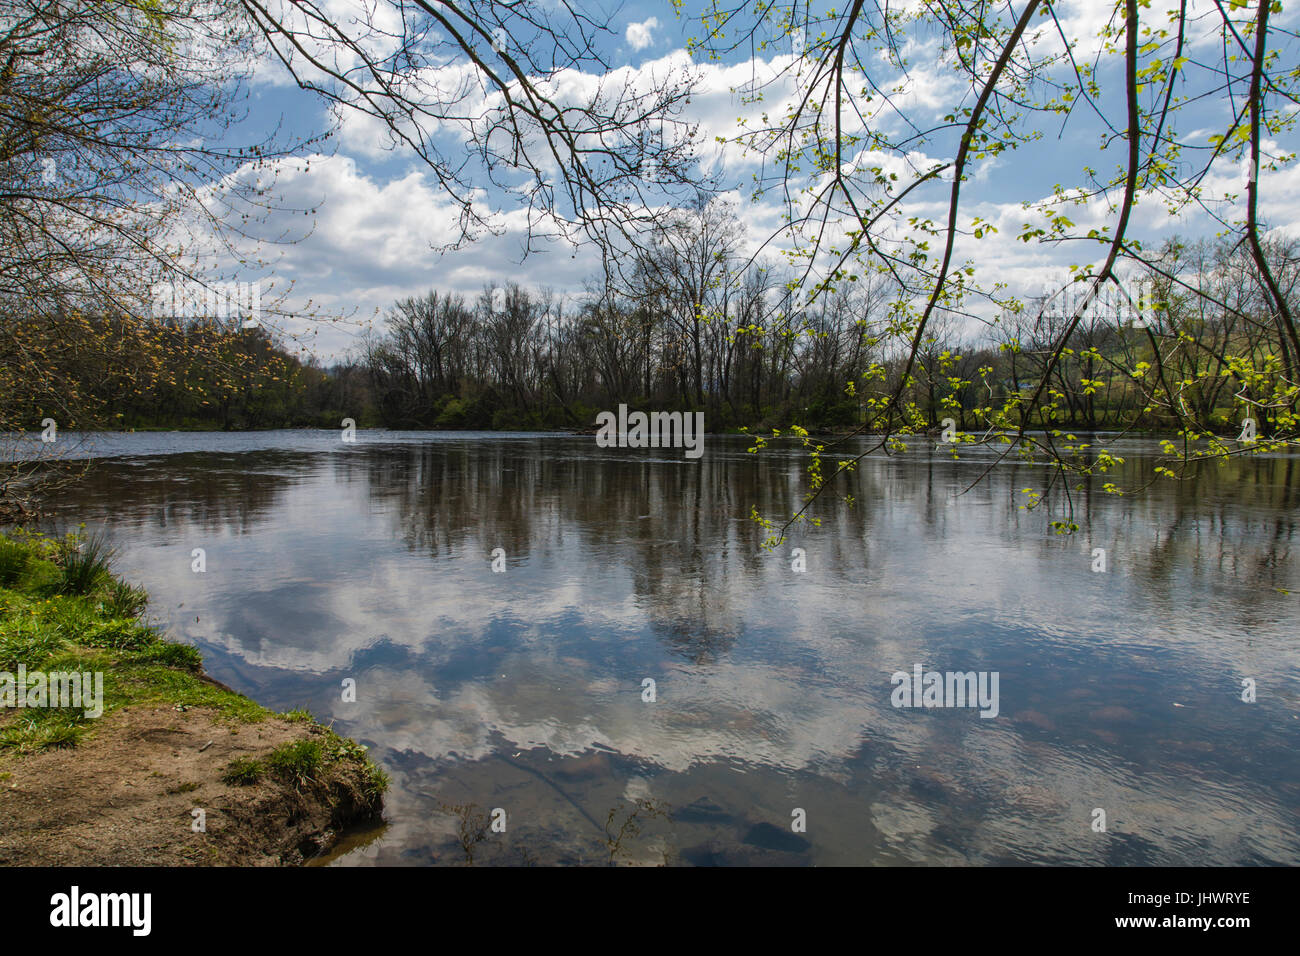 Sycamore Shoals in Elizabethton, Tennessee Stock Photo